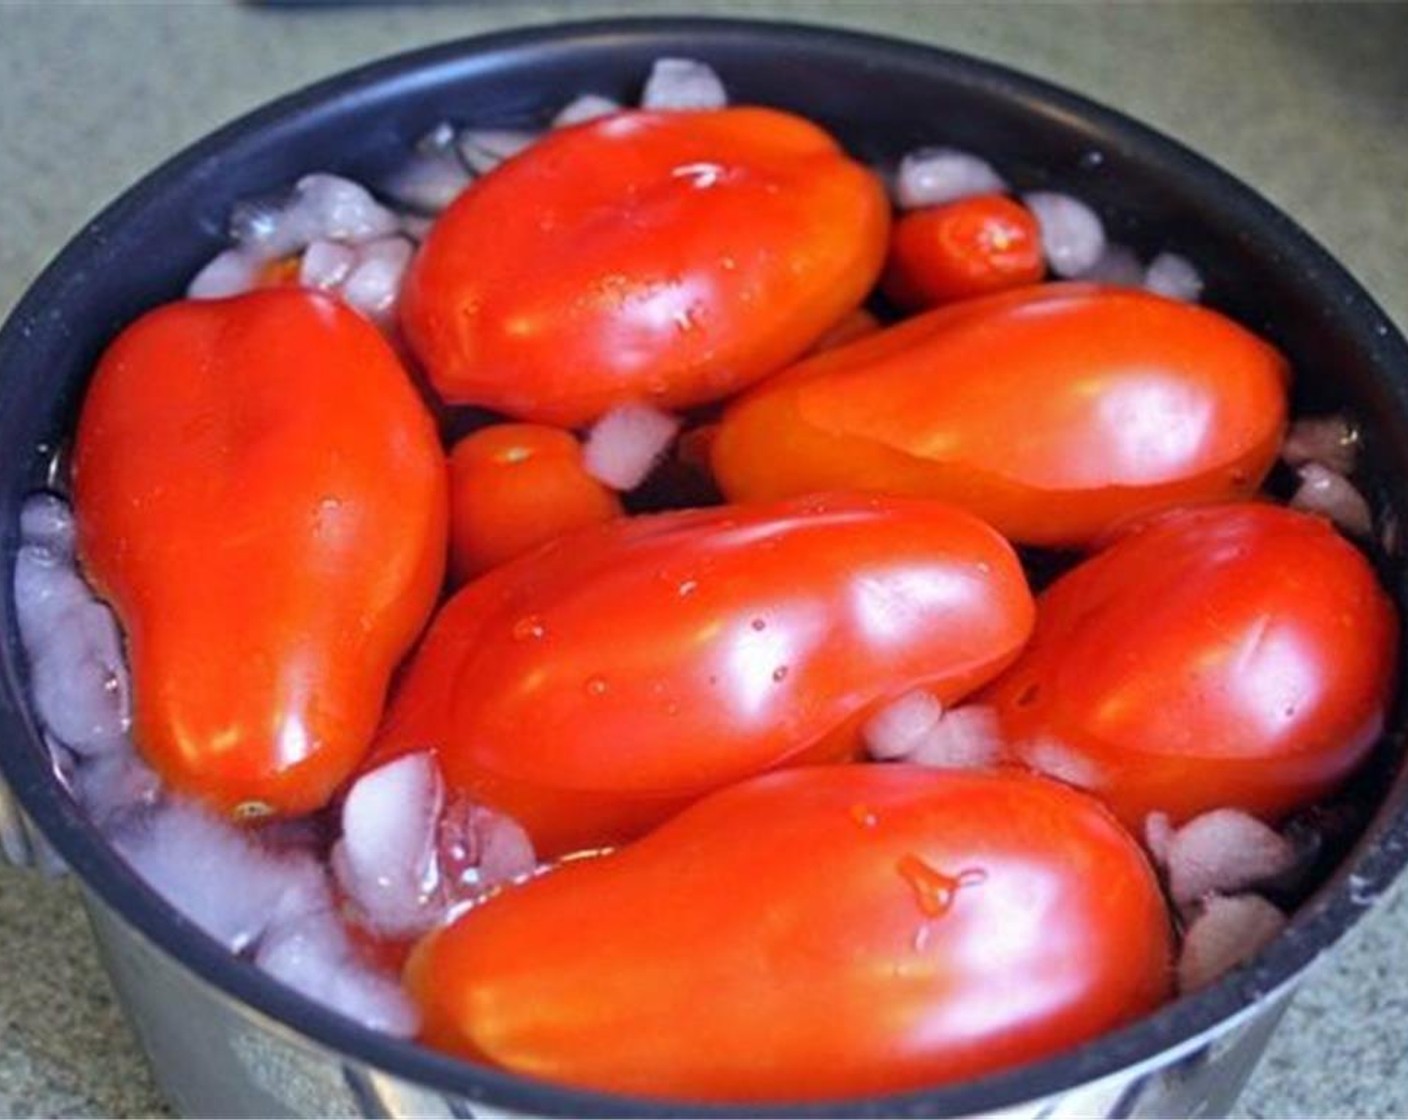 step 4 Remove the tomatoes from the boiling water and place into the ice bath for 1-2 minutes. The skins should start to visibly shrink.